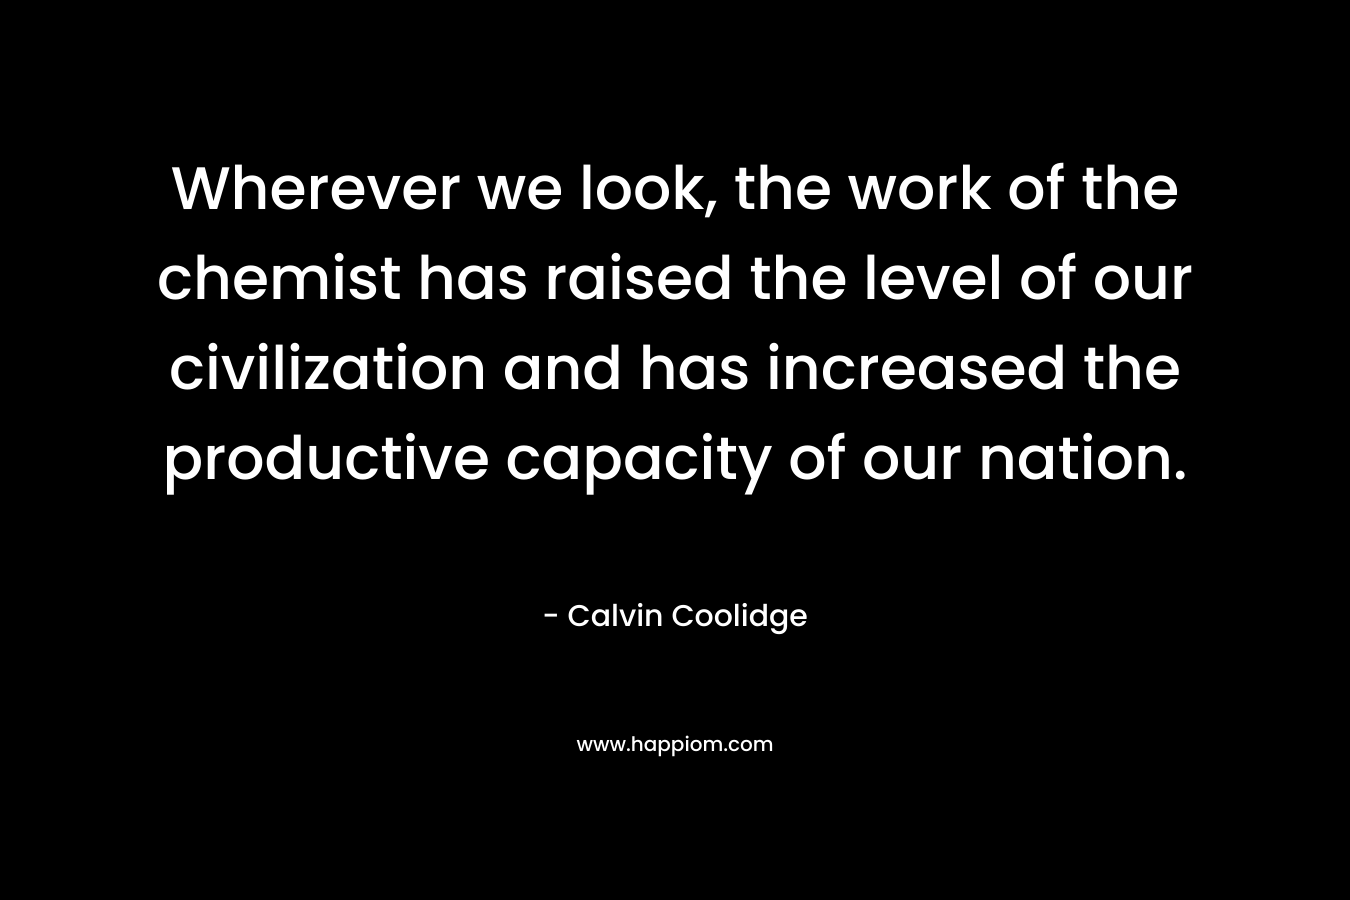 Wherever we look, the work of the chemist has raised the level of our civilization and has increased the productive capacity of our nation.